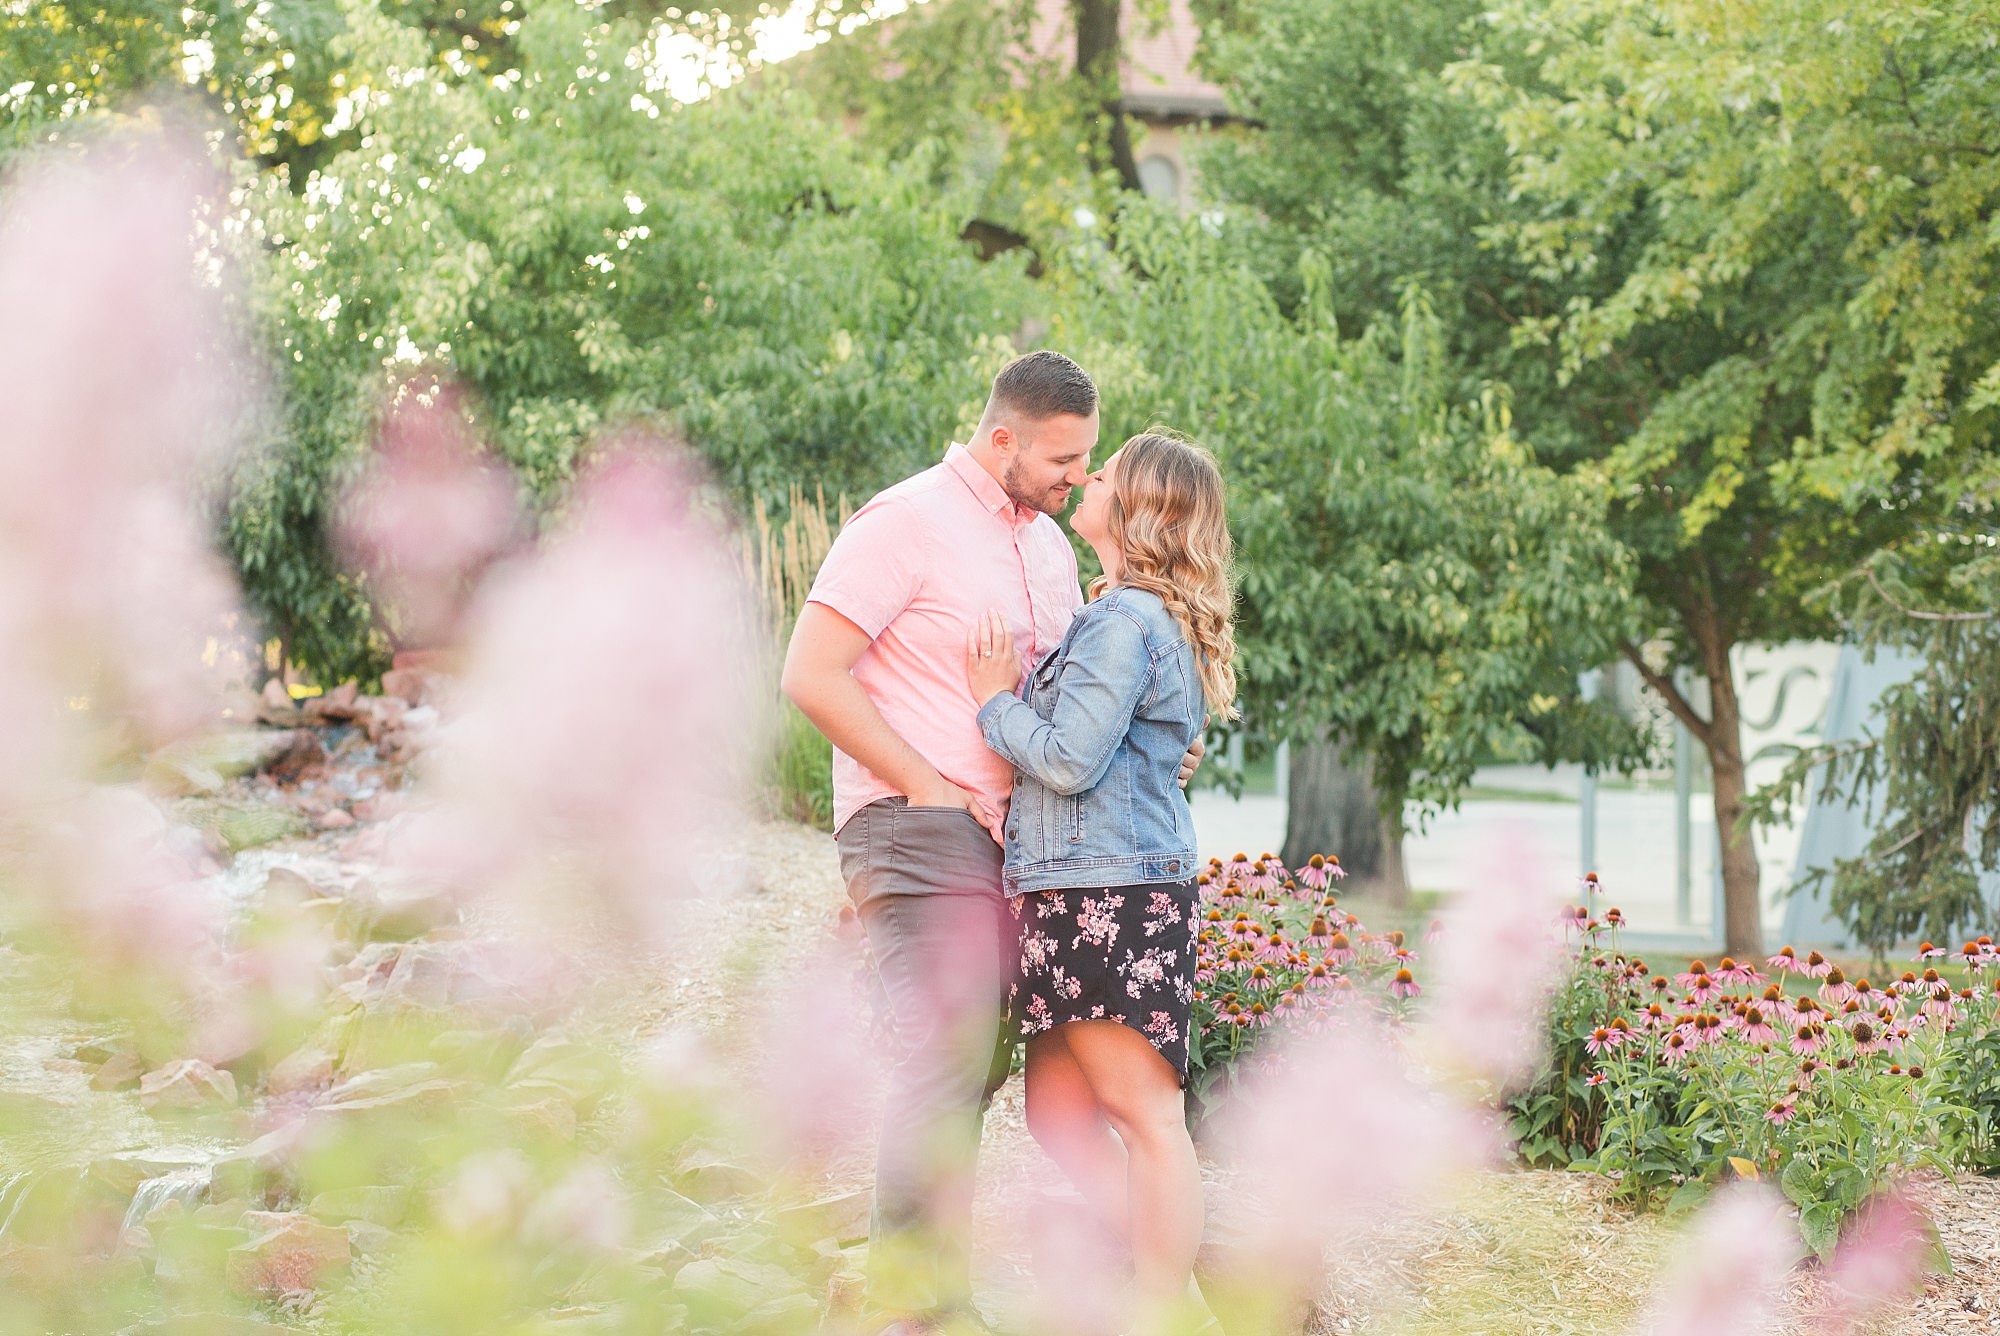 Engaged couple in pink, denim, and floral print kiss among pink and purple flowers